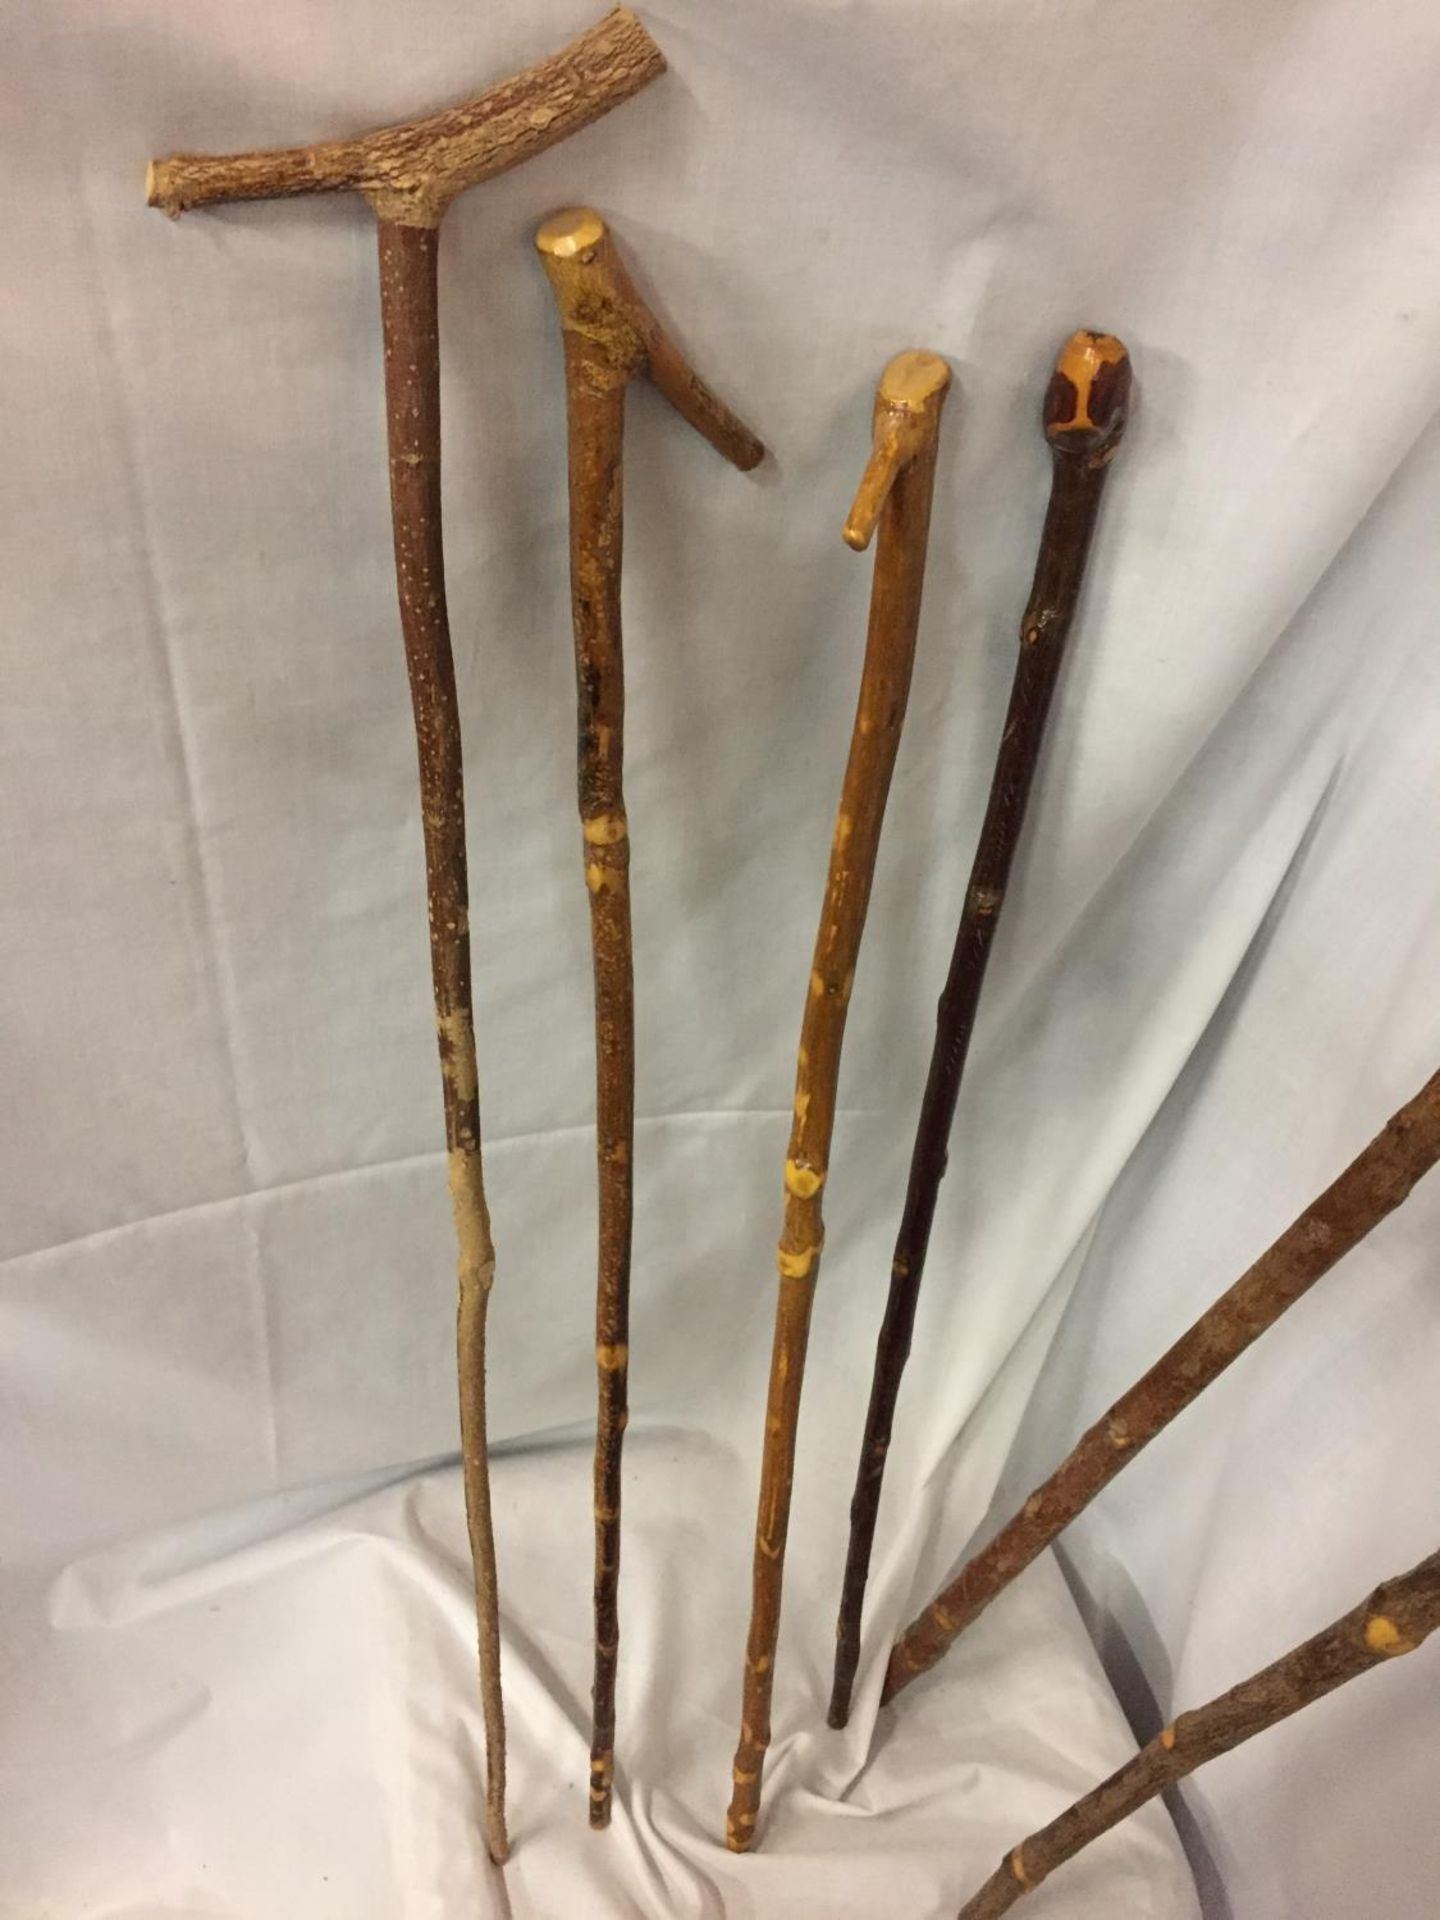 SIX VARIOUS HAND CARVED WALKING STICKS - Image 2 of 7